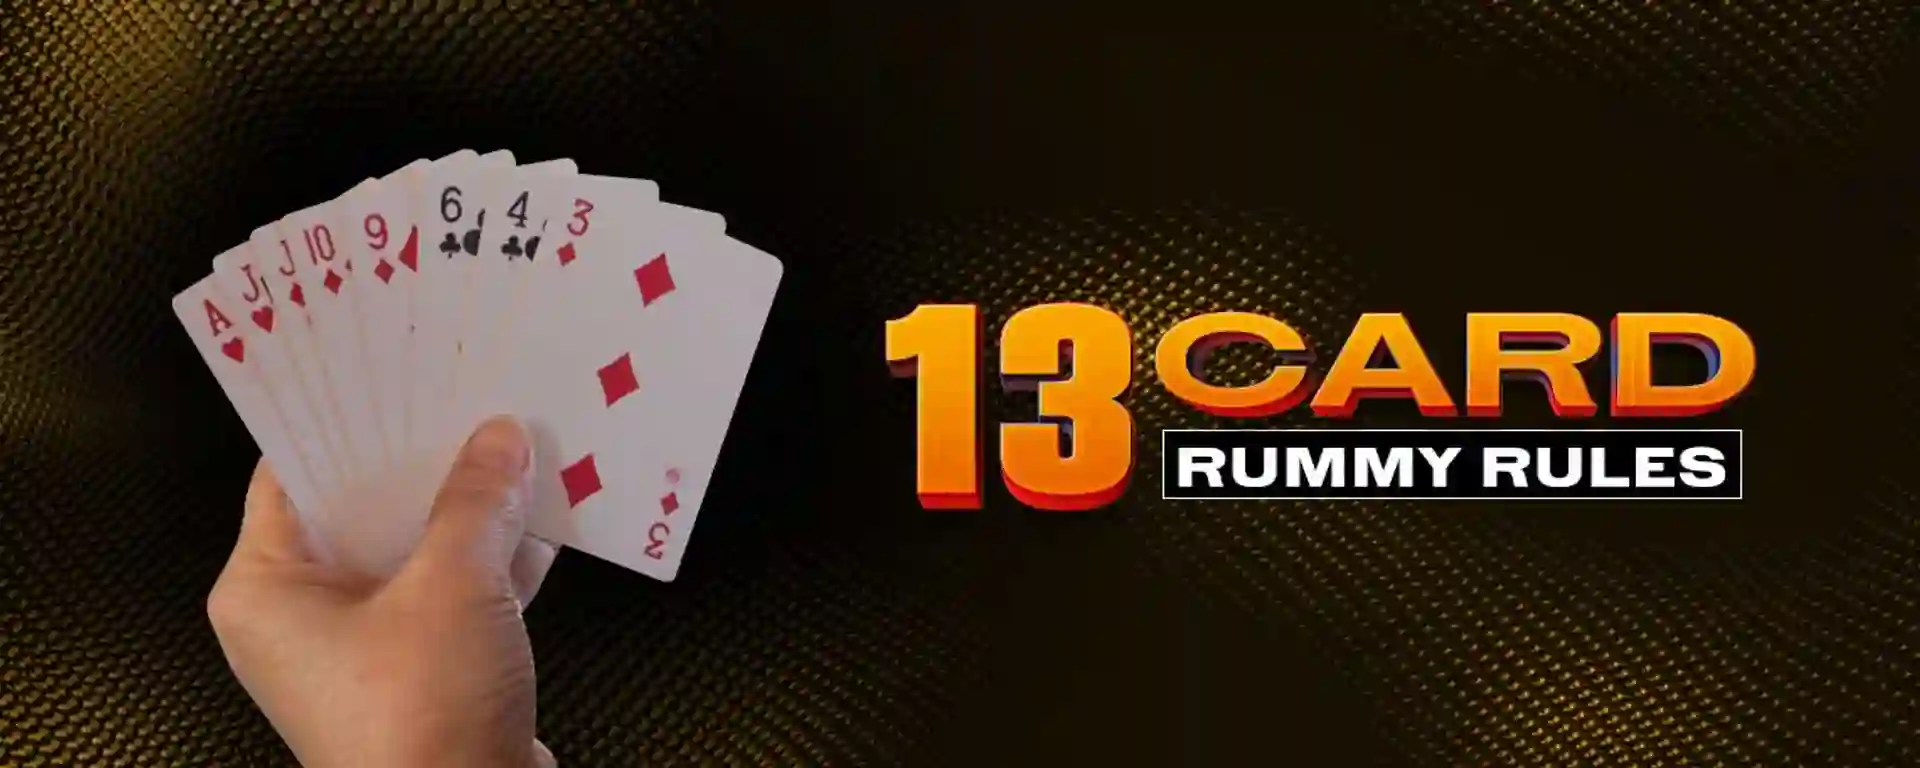 13 Cards Rummy Rules